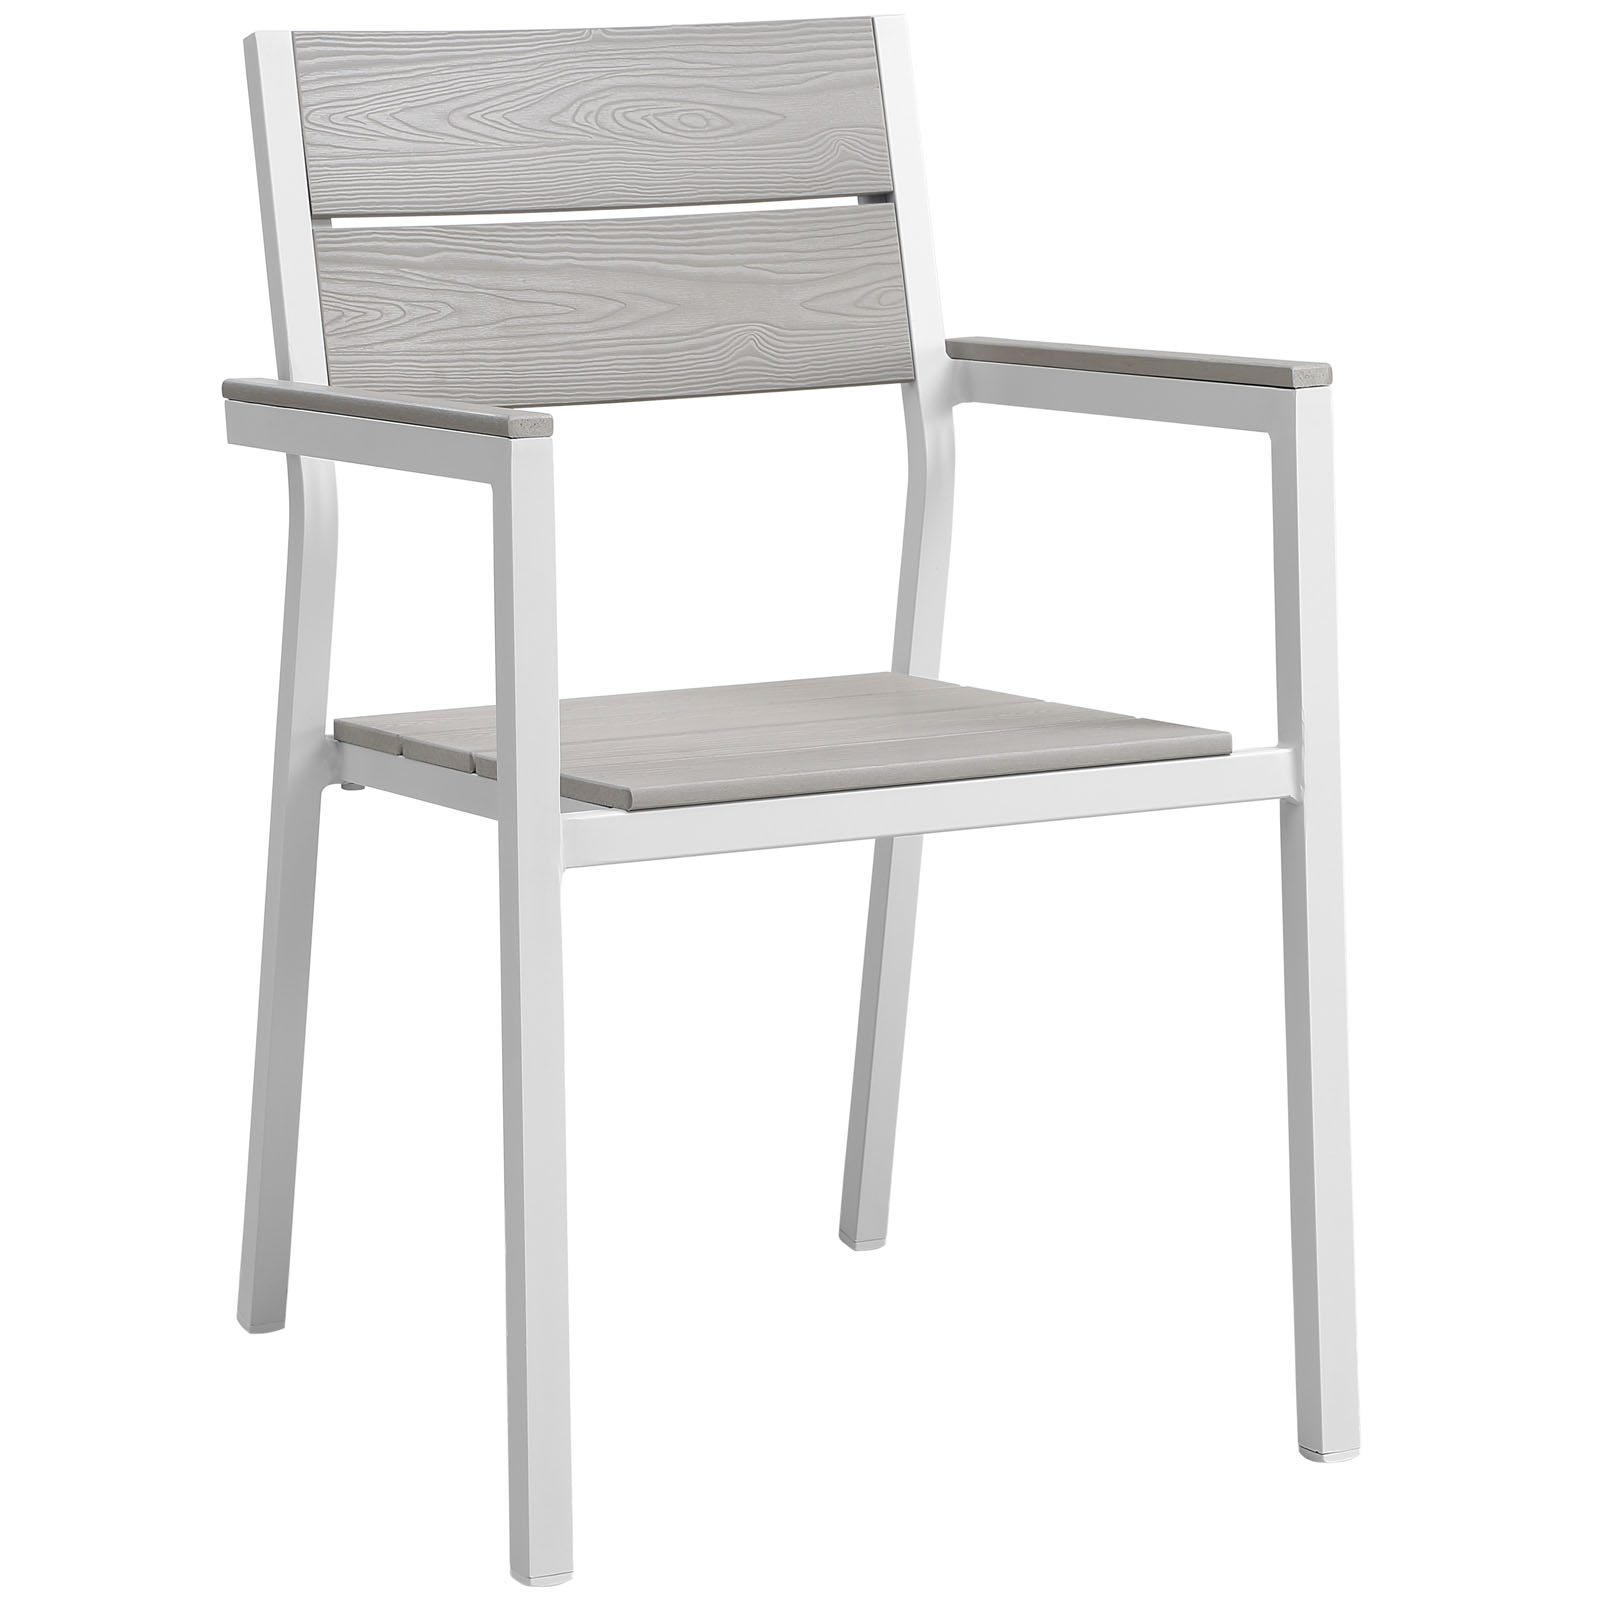 Modway Maine 3 Piece Outdoor Patio Dining Set in White Light Gray - image 3 of 7